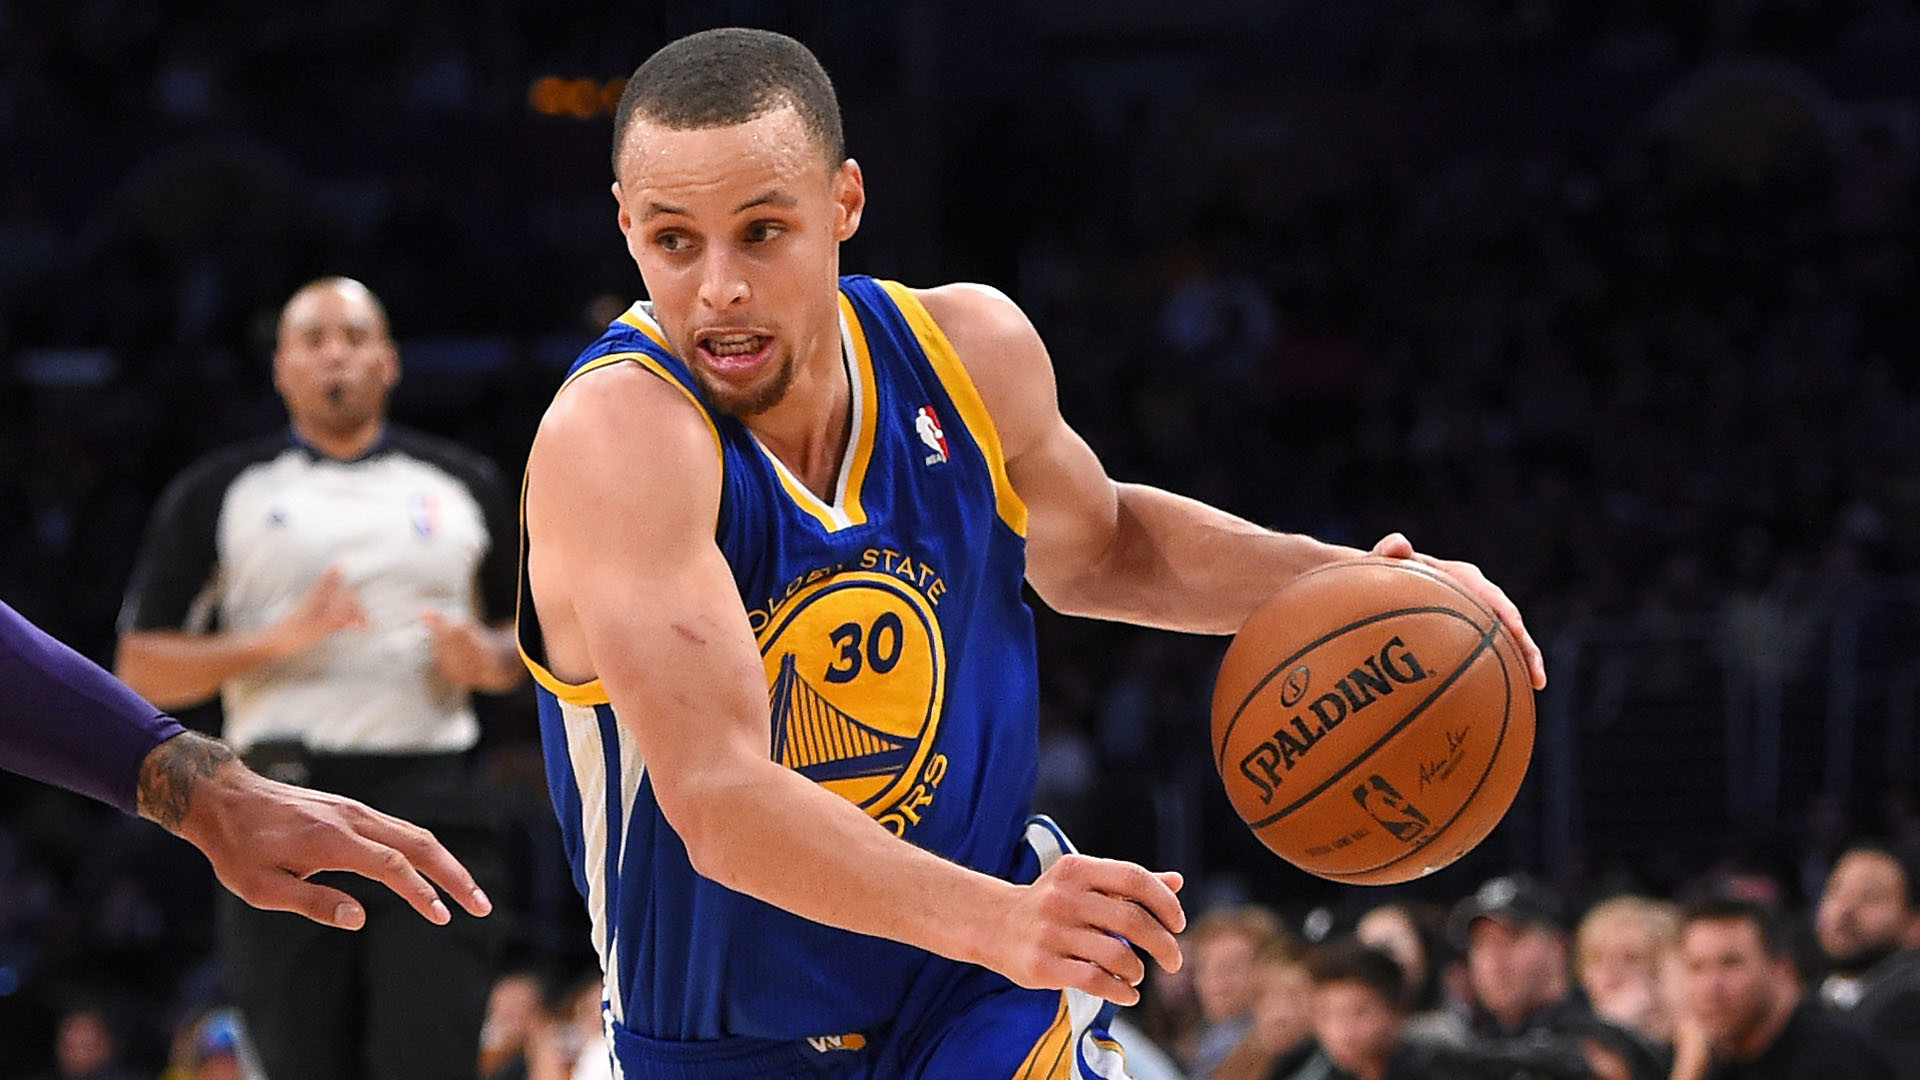 1920x1080 stephen curry images and pictures (Handy Birds 1920 x 1080) | ololoshka |  Pinterest | Stephen curry images and Stephen curry